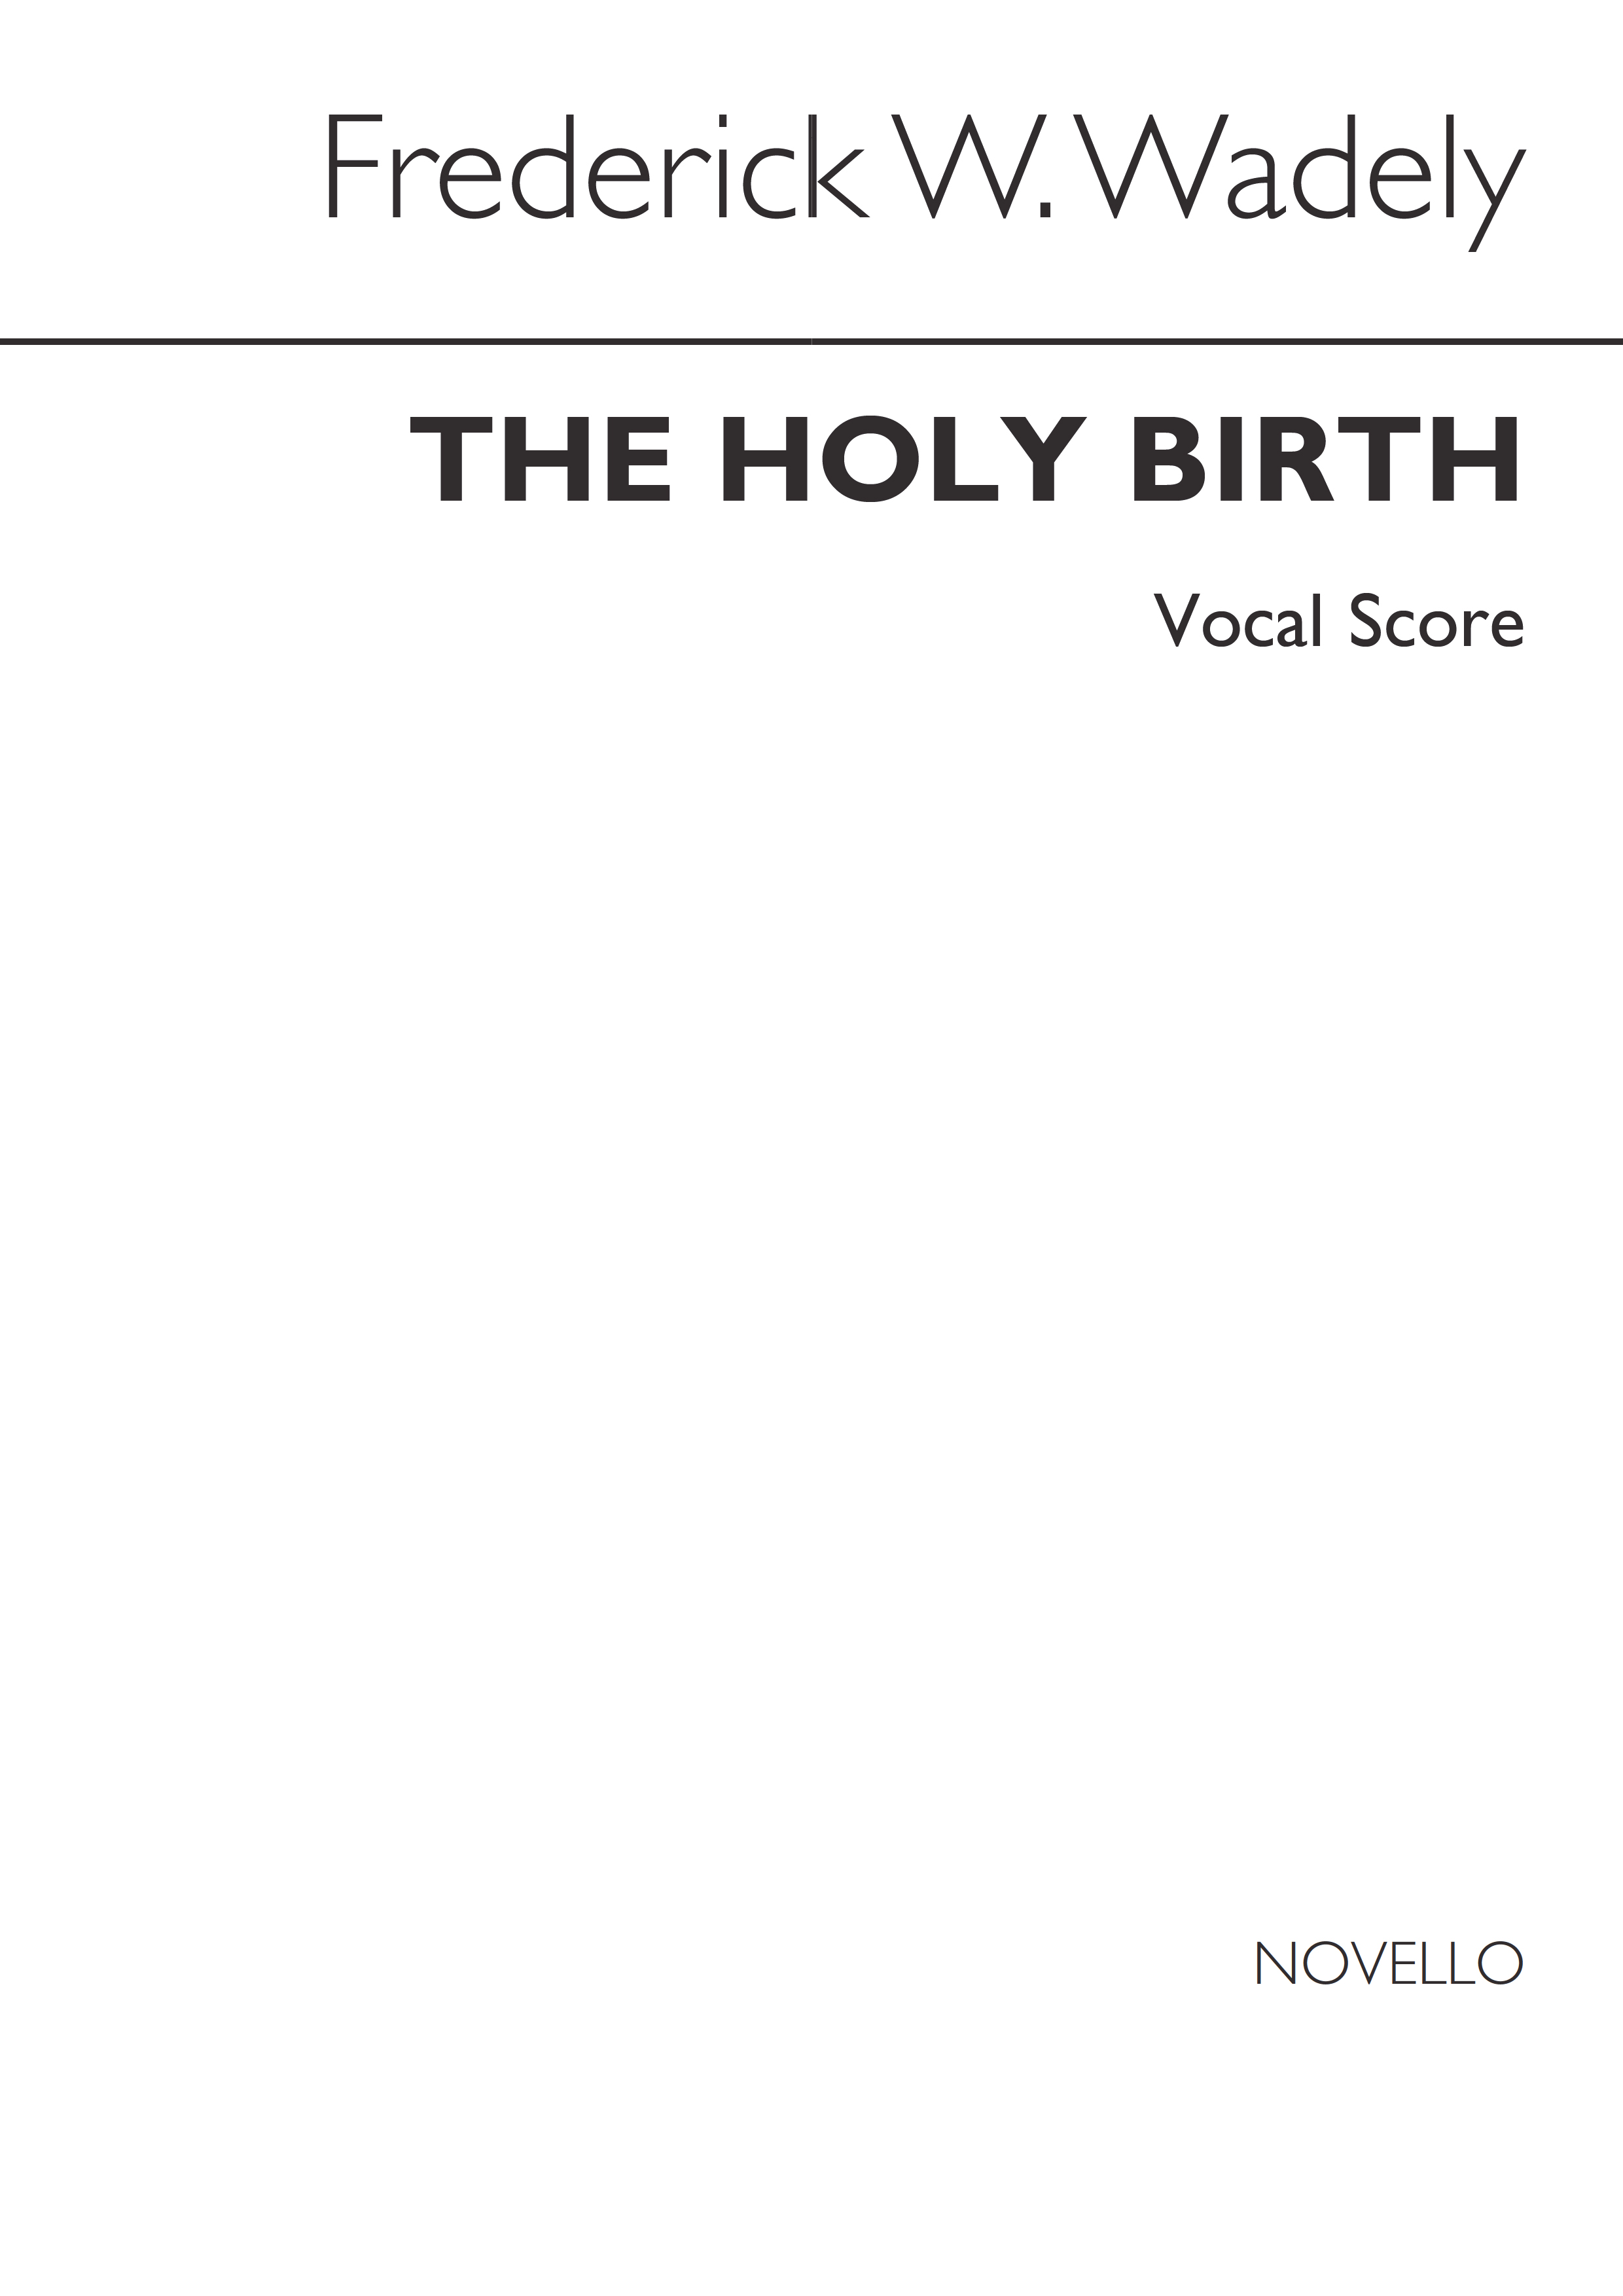 Frederick W. Wadely: The Holy Birth: SATB: Vocal Score